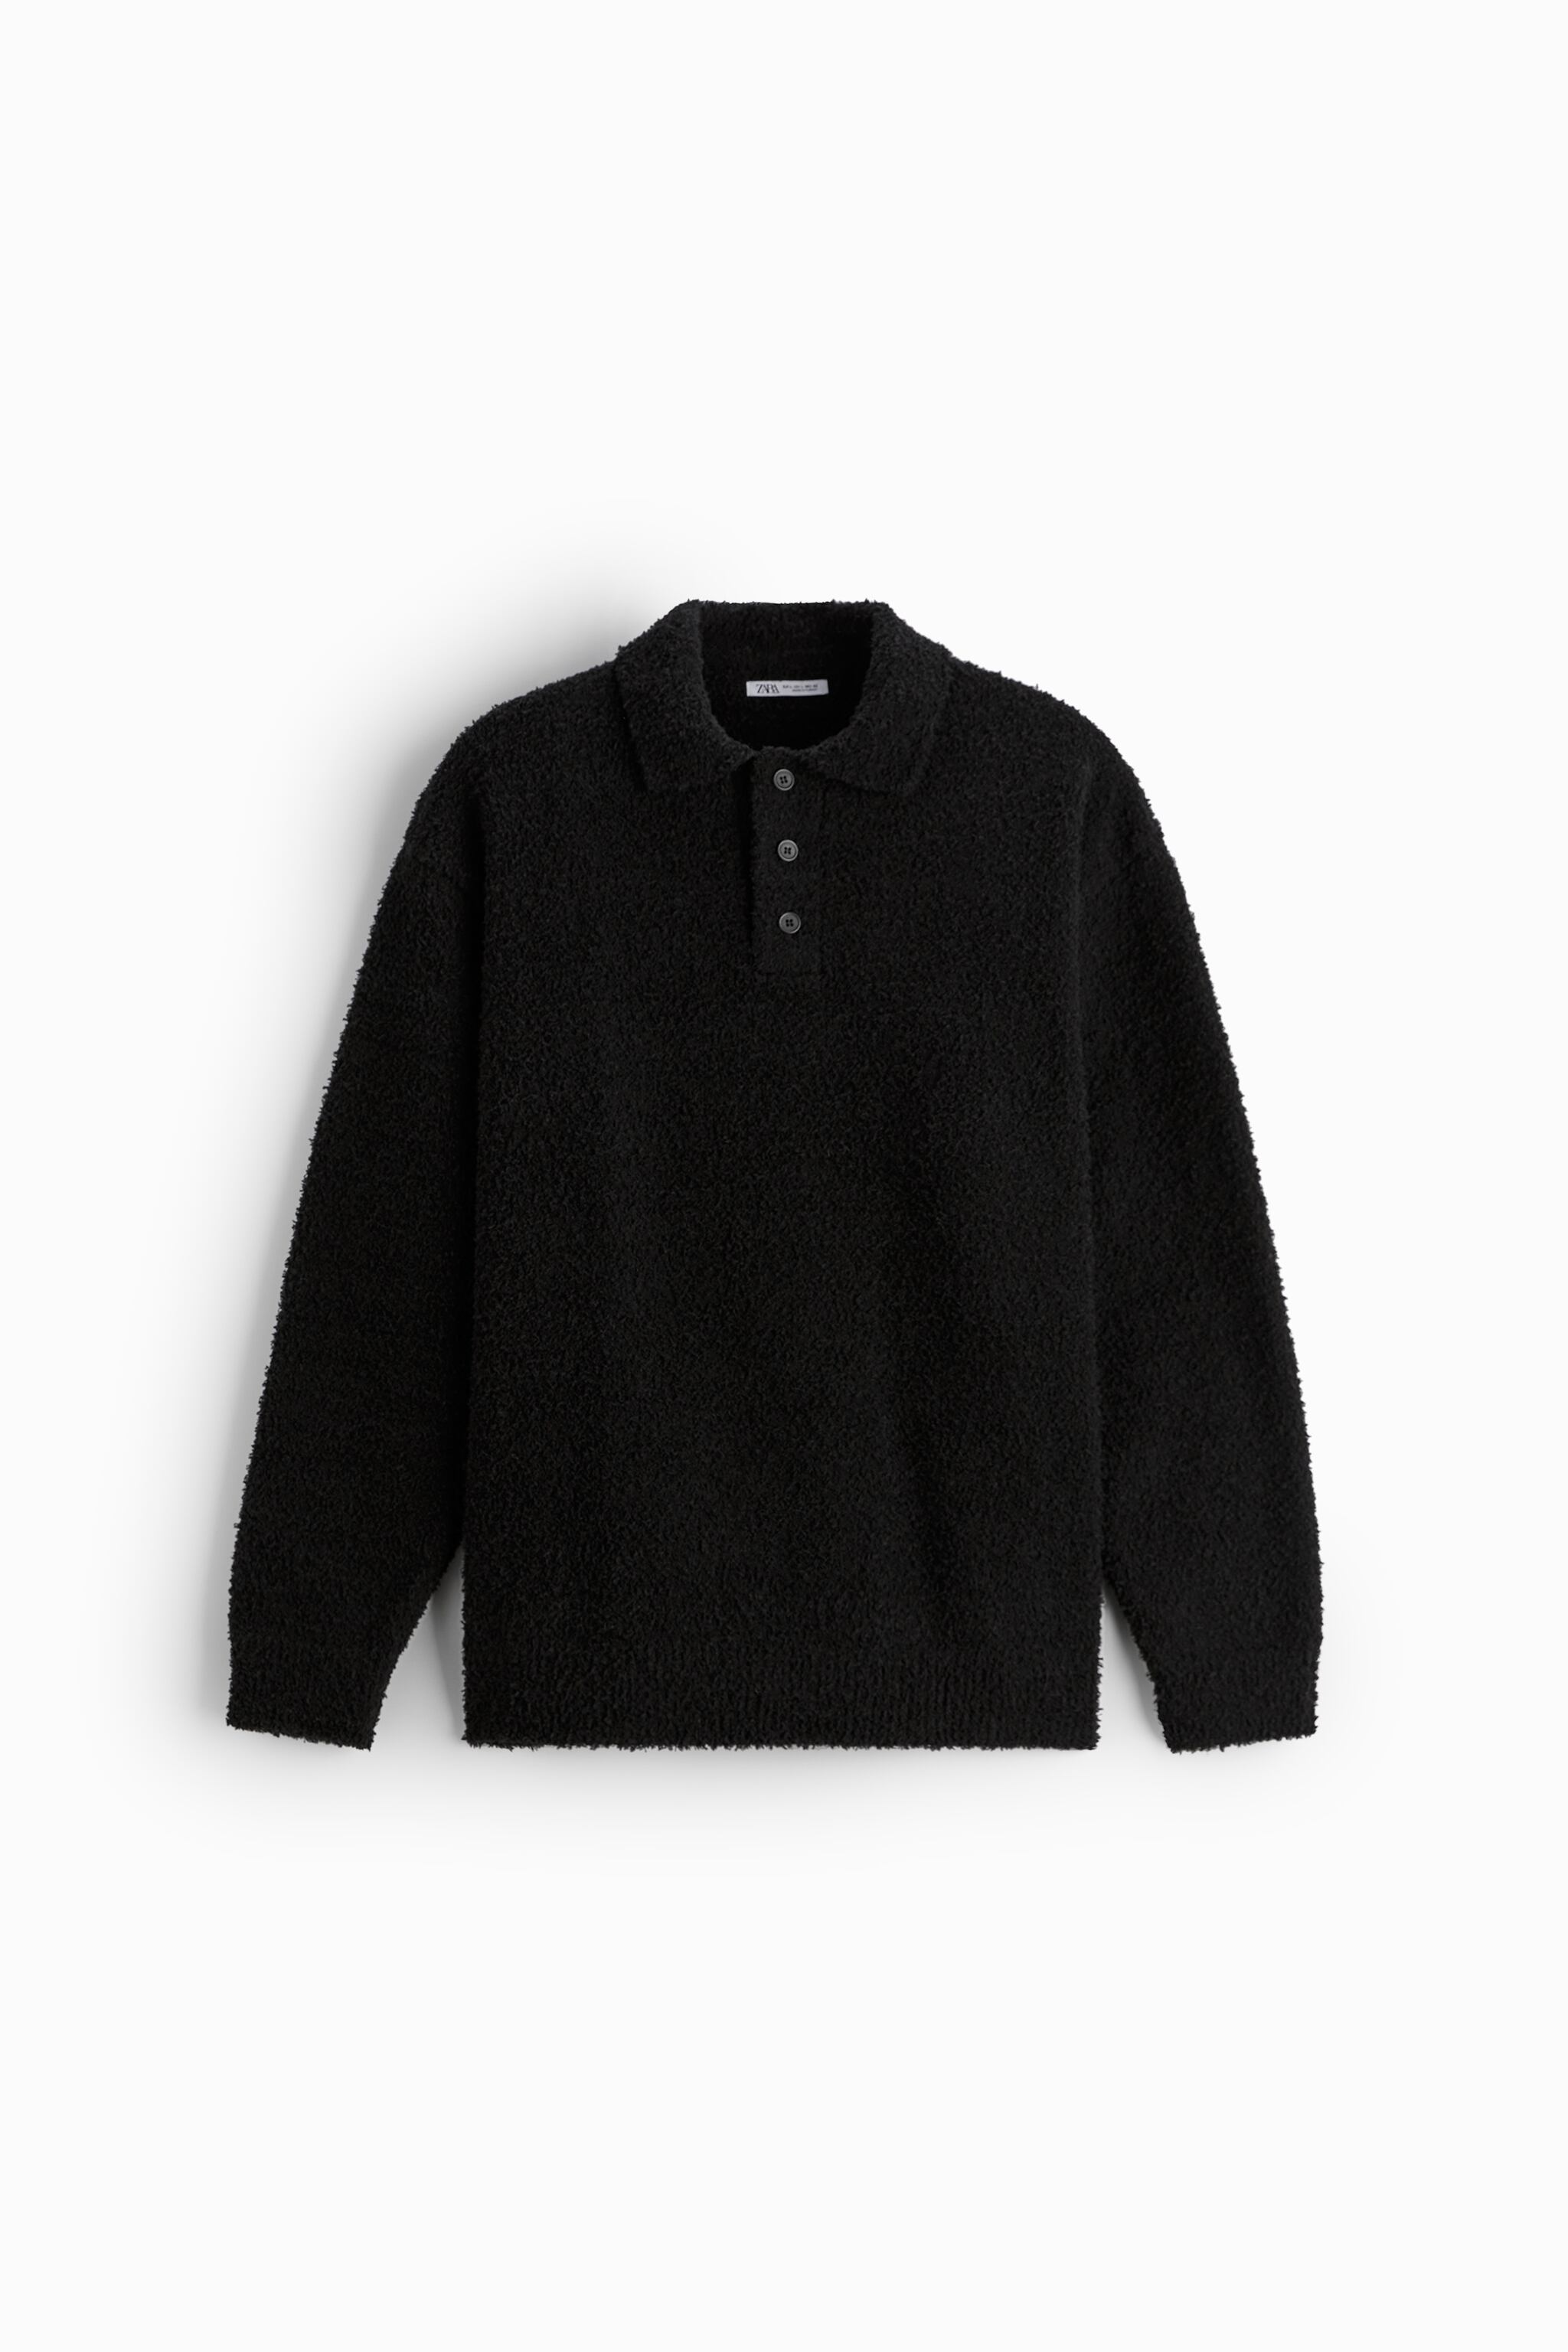 TEXTURED KNIT POLO SHIRT